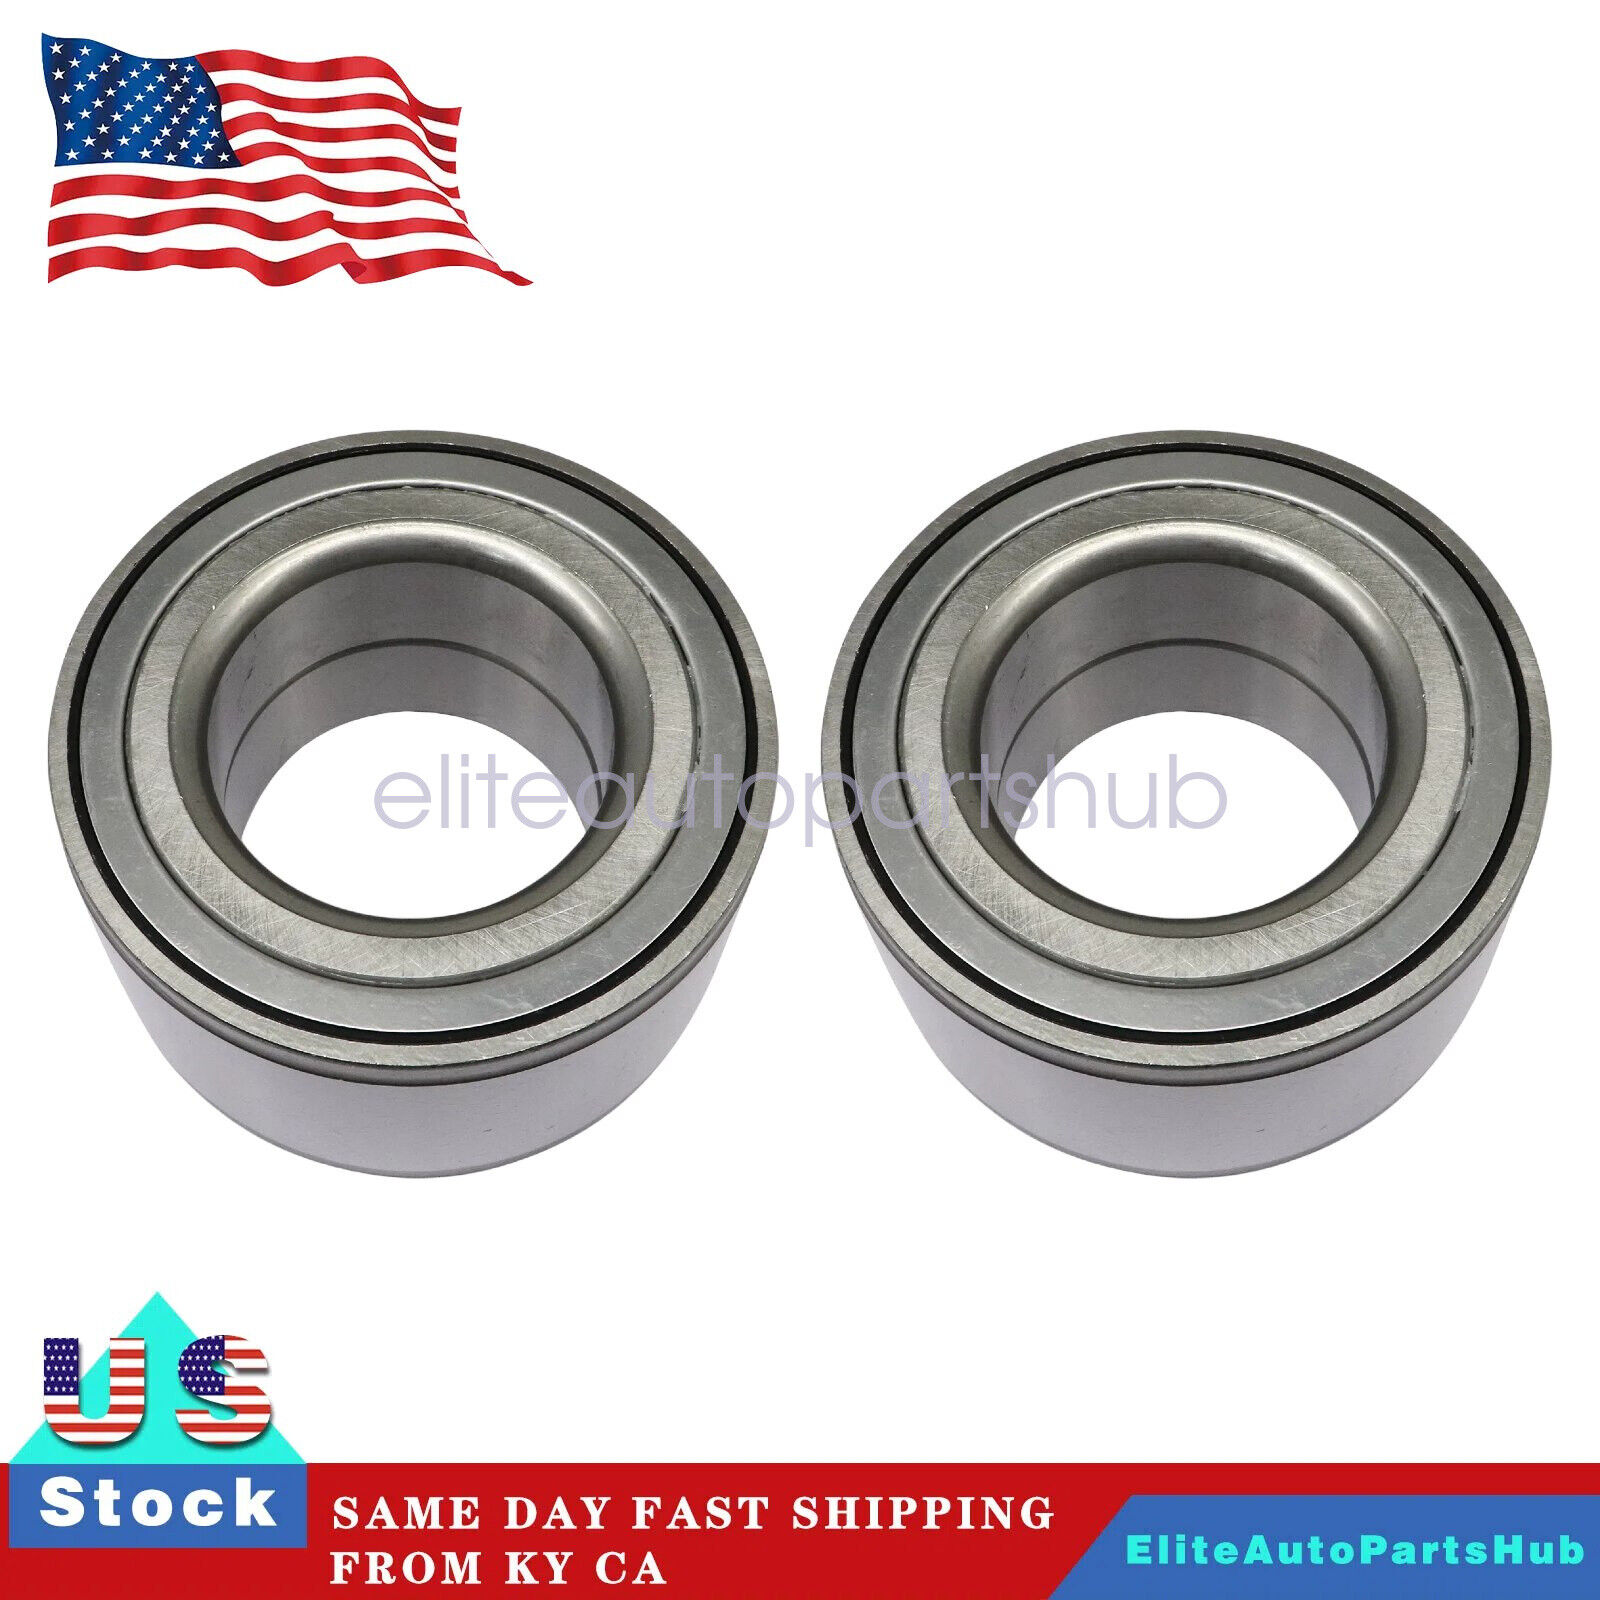 2X Front Wheel Bearings Kit fit Toyota Sequoia 4Runner Tacoma Tundra